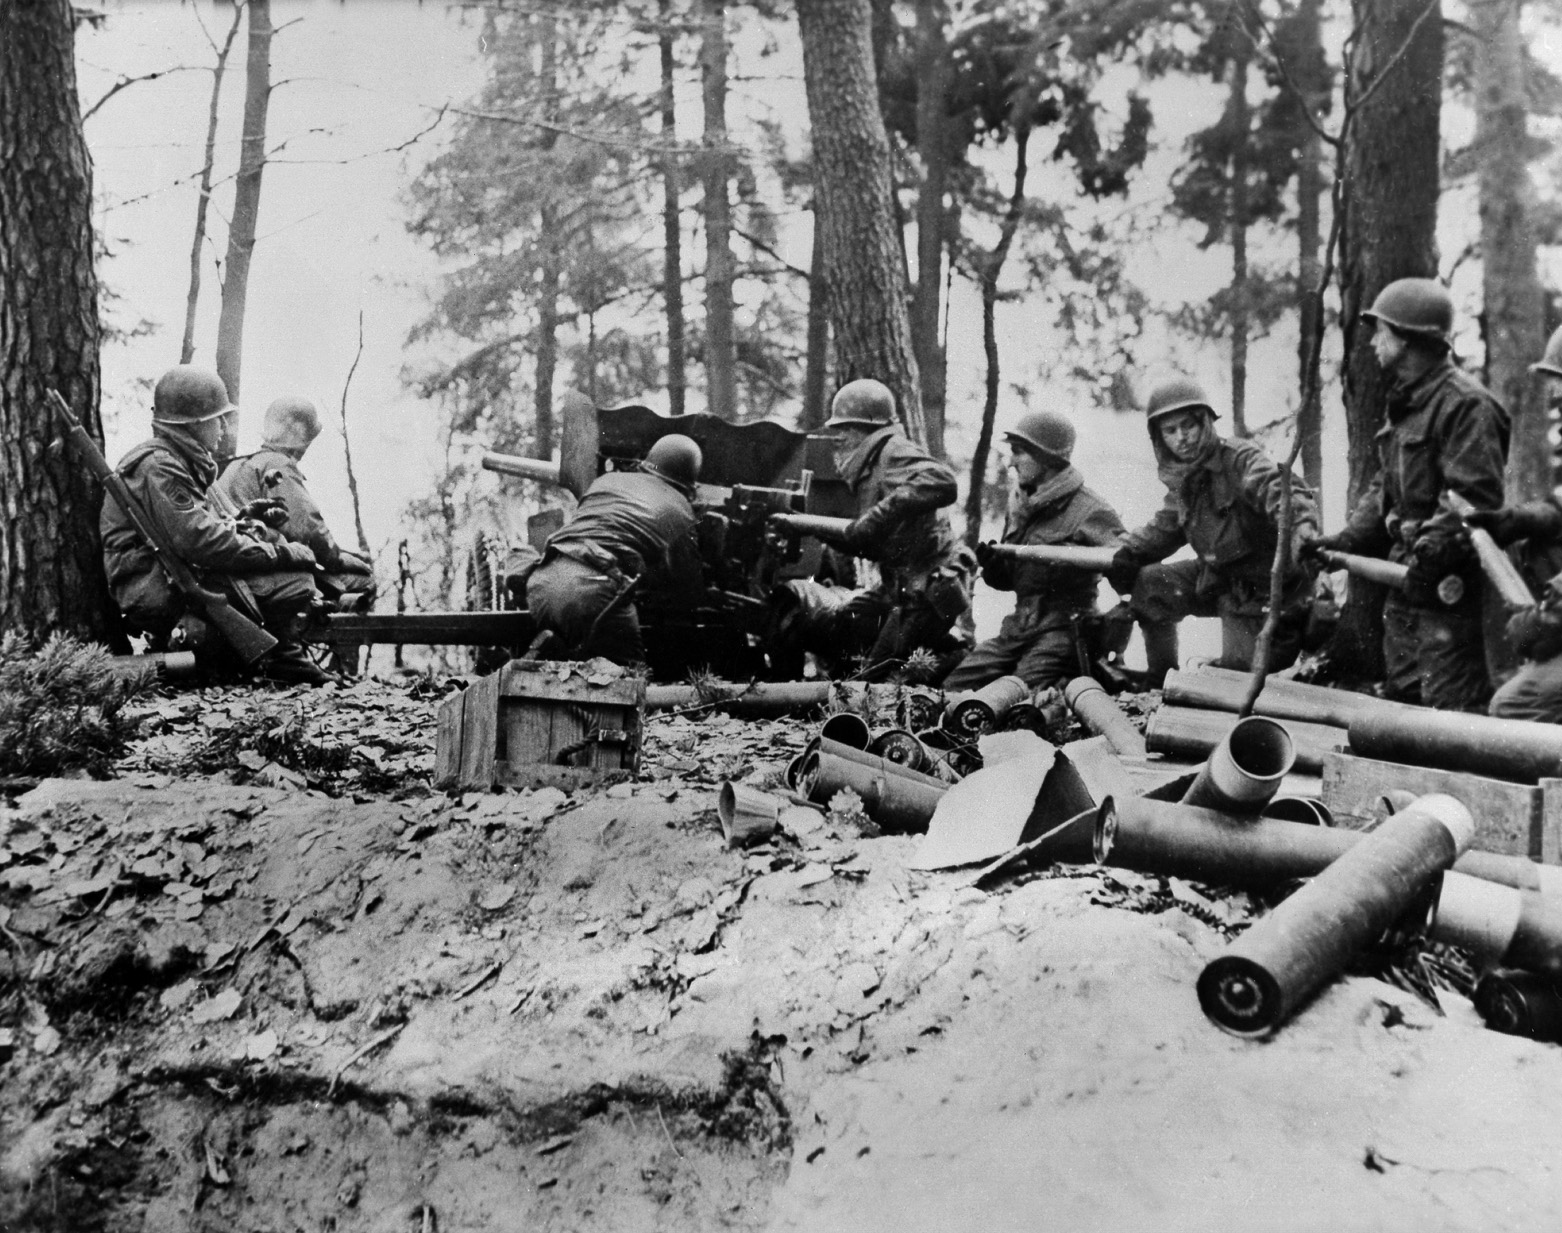 Company C of the 62nd Armored Infantry Battalion had five 57mm guns with which to cover the roads leading into Bannstein. Every weapon available was used in an attempt to slow the Germans.